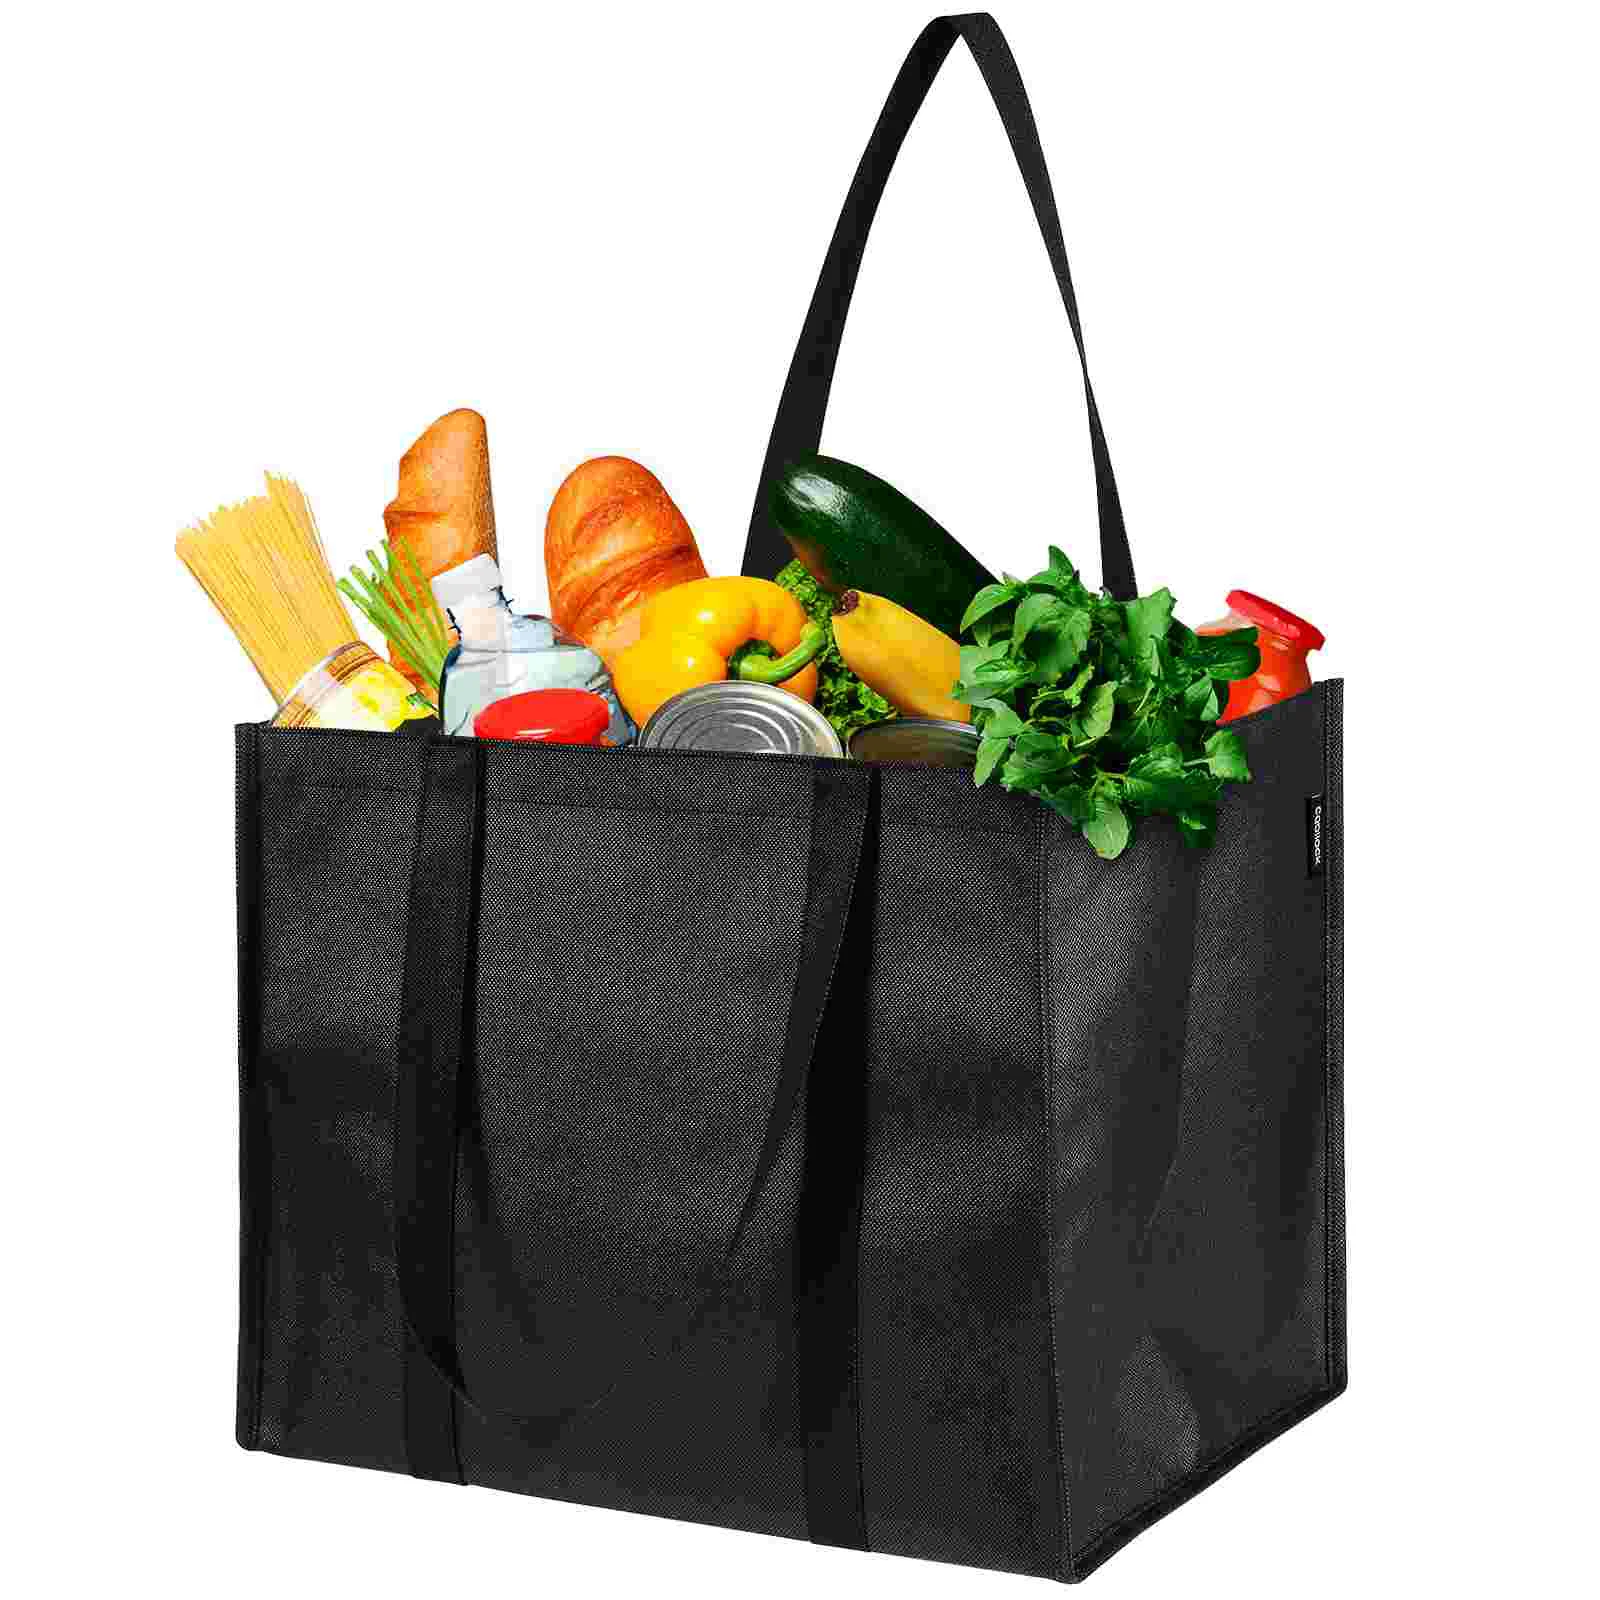 

Large Reusable Grocery Bag Foldable Shopping Tote Heavy Duty Storage Bags With Reinforced Handles